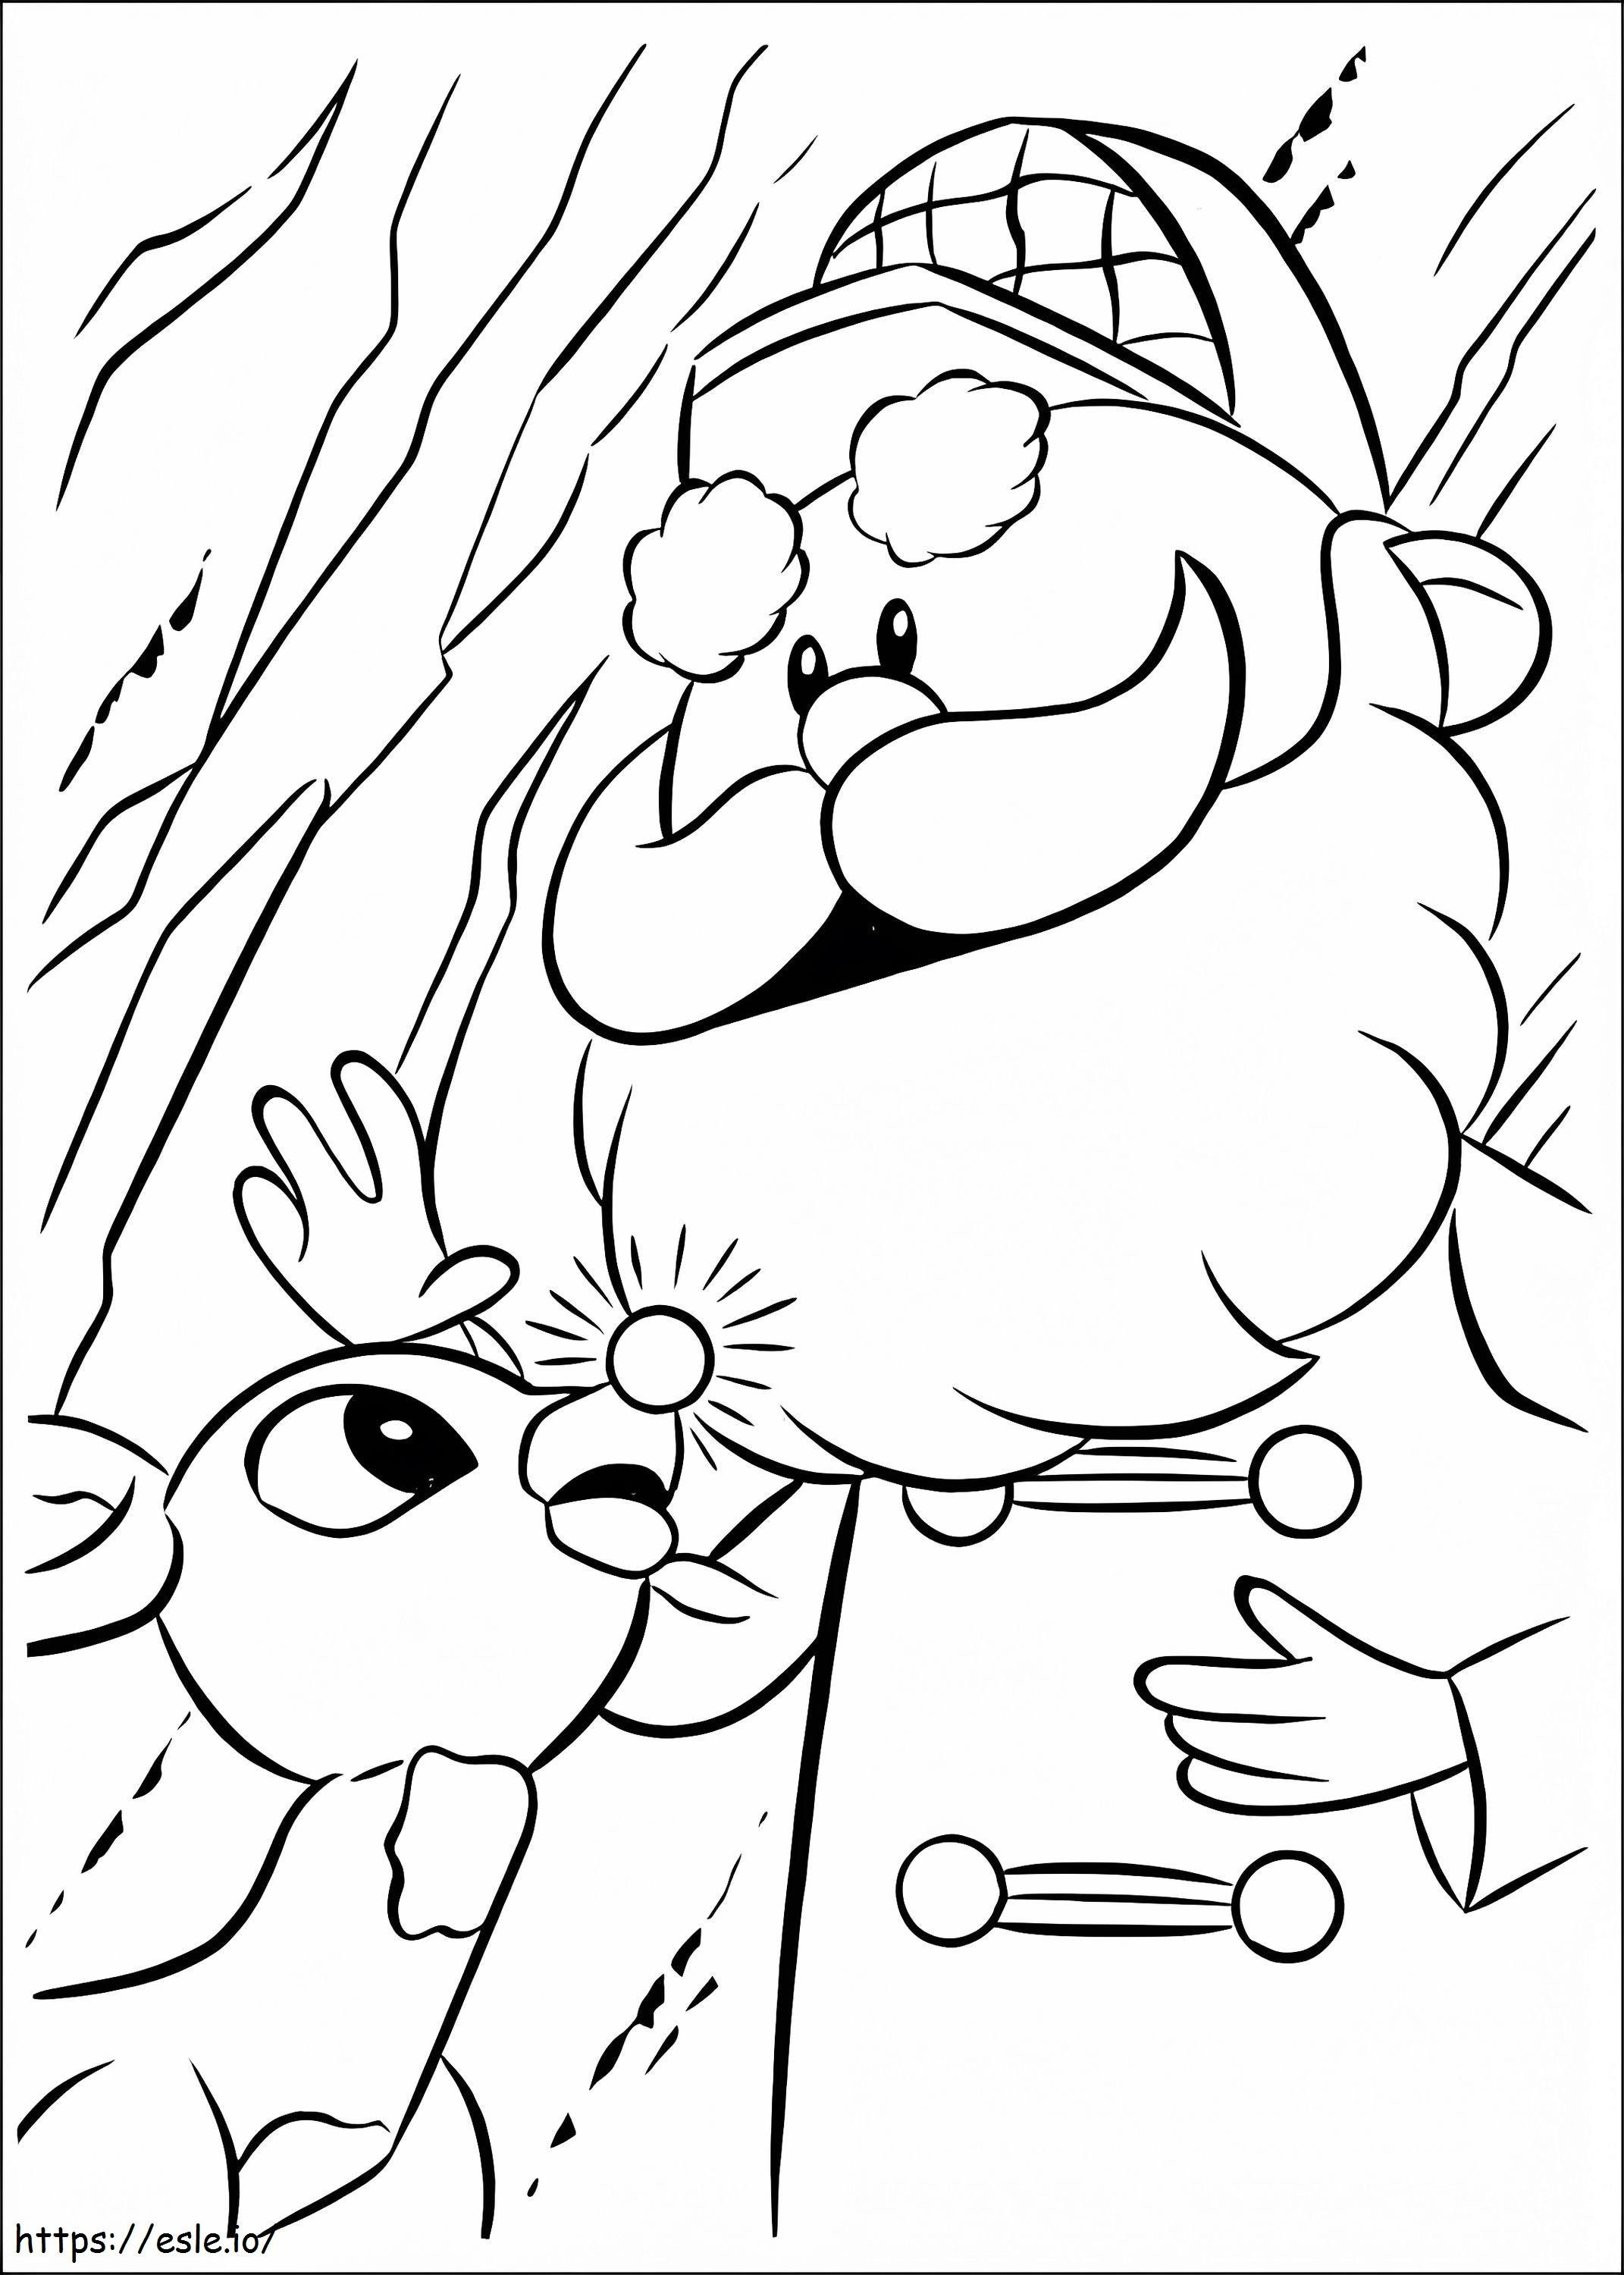 Rudolph The Red Nosed Reindeer 4 coloring page